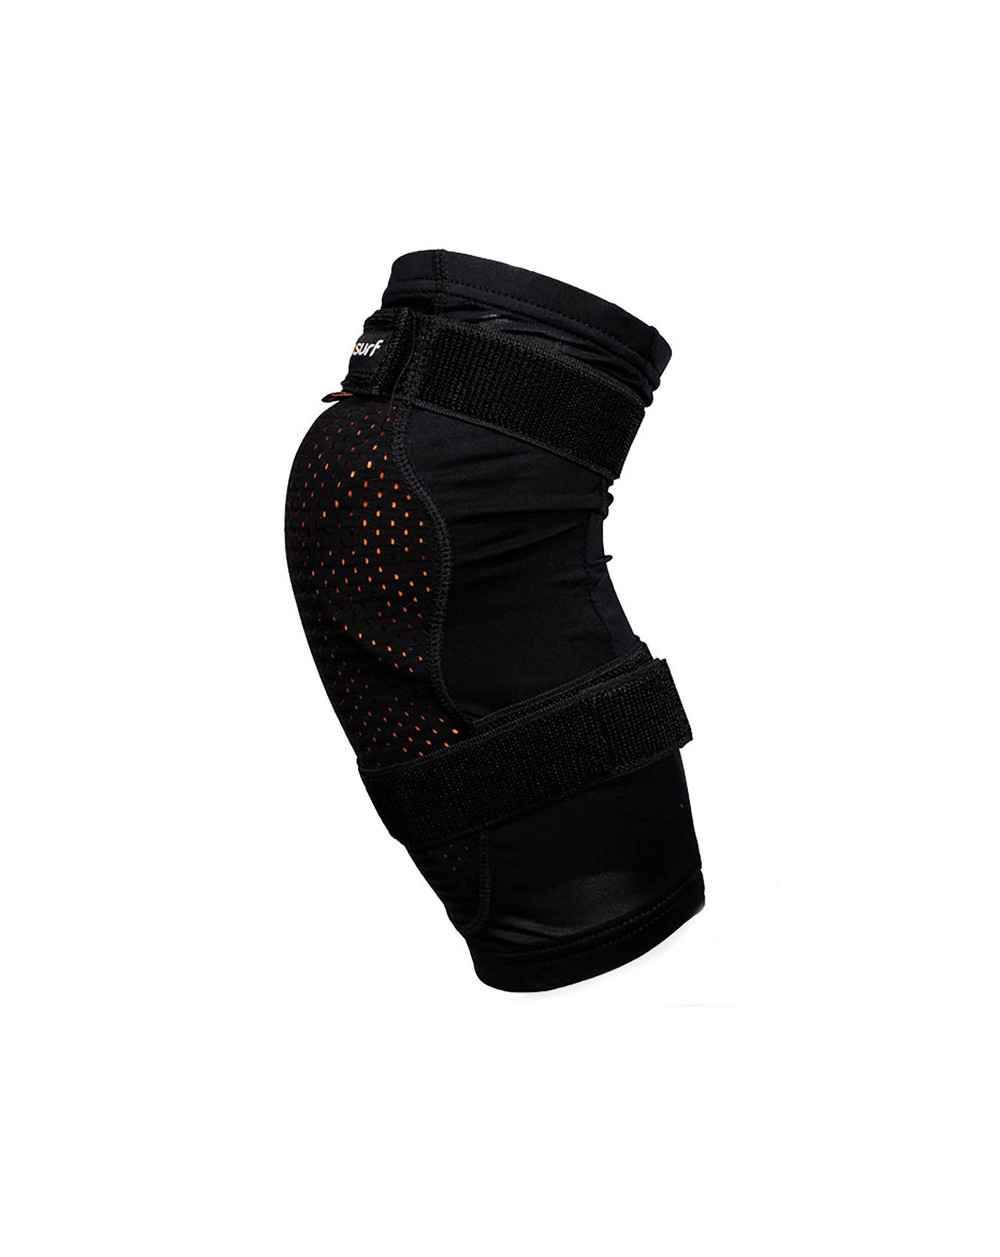 Prosurf Knee D3O - Protections